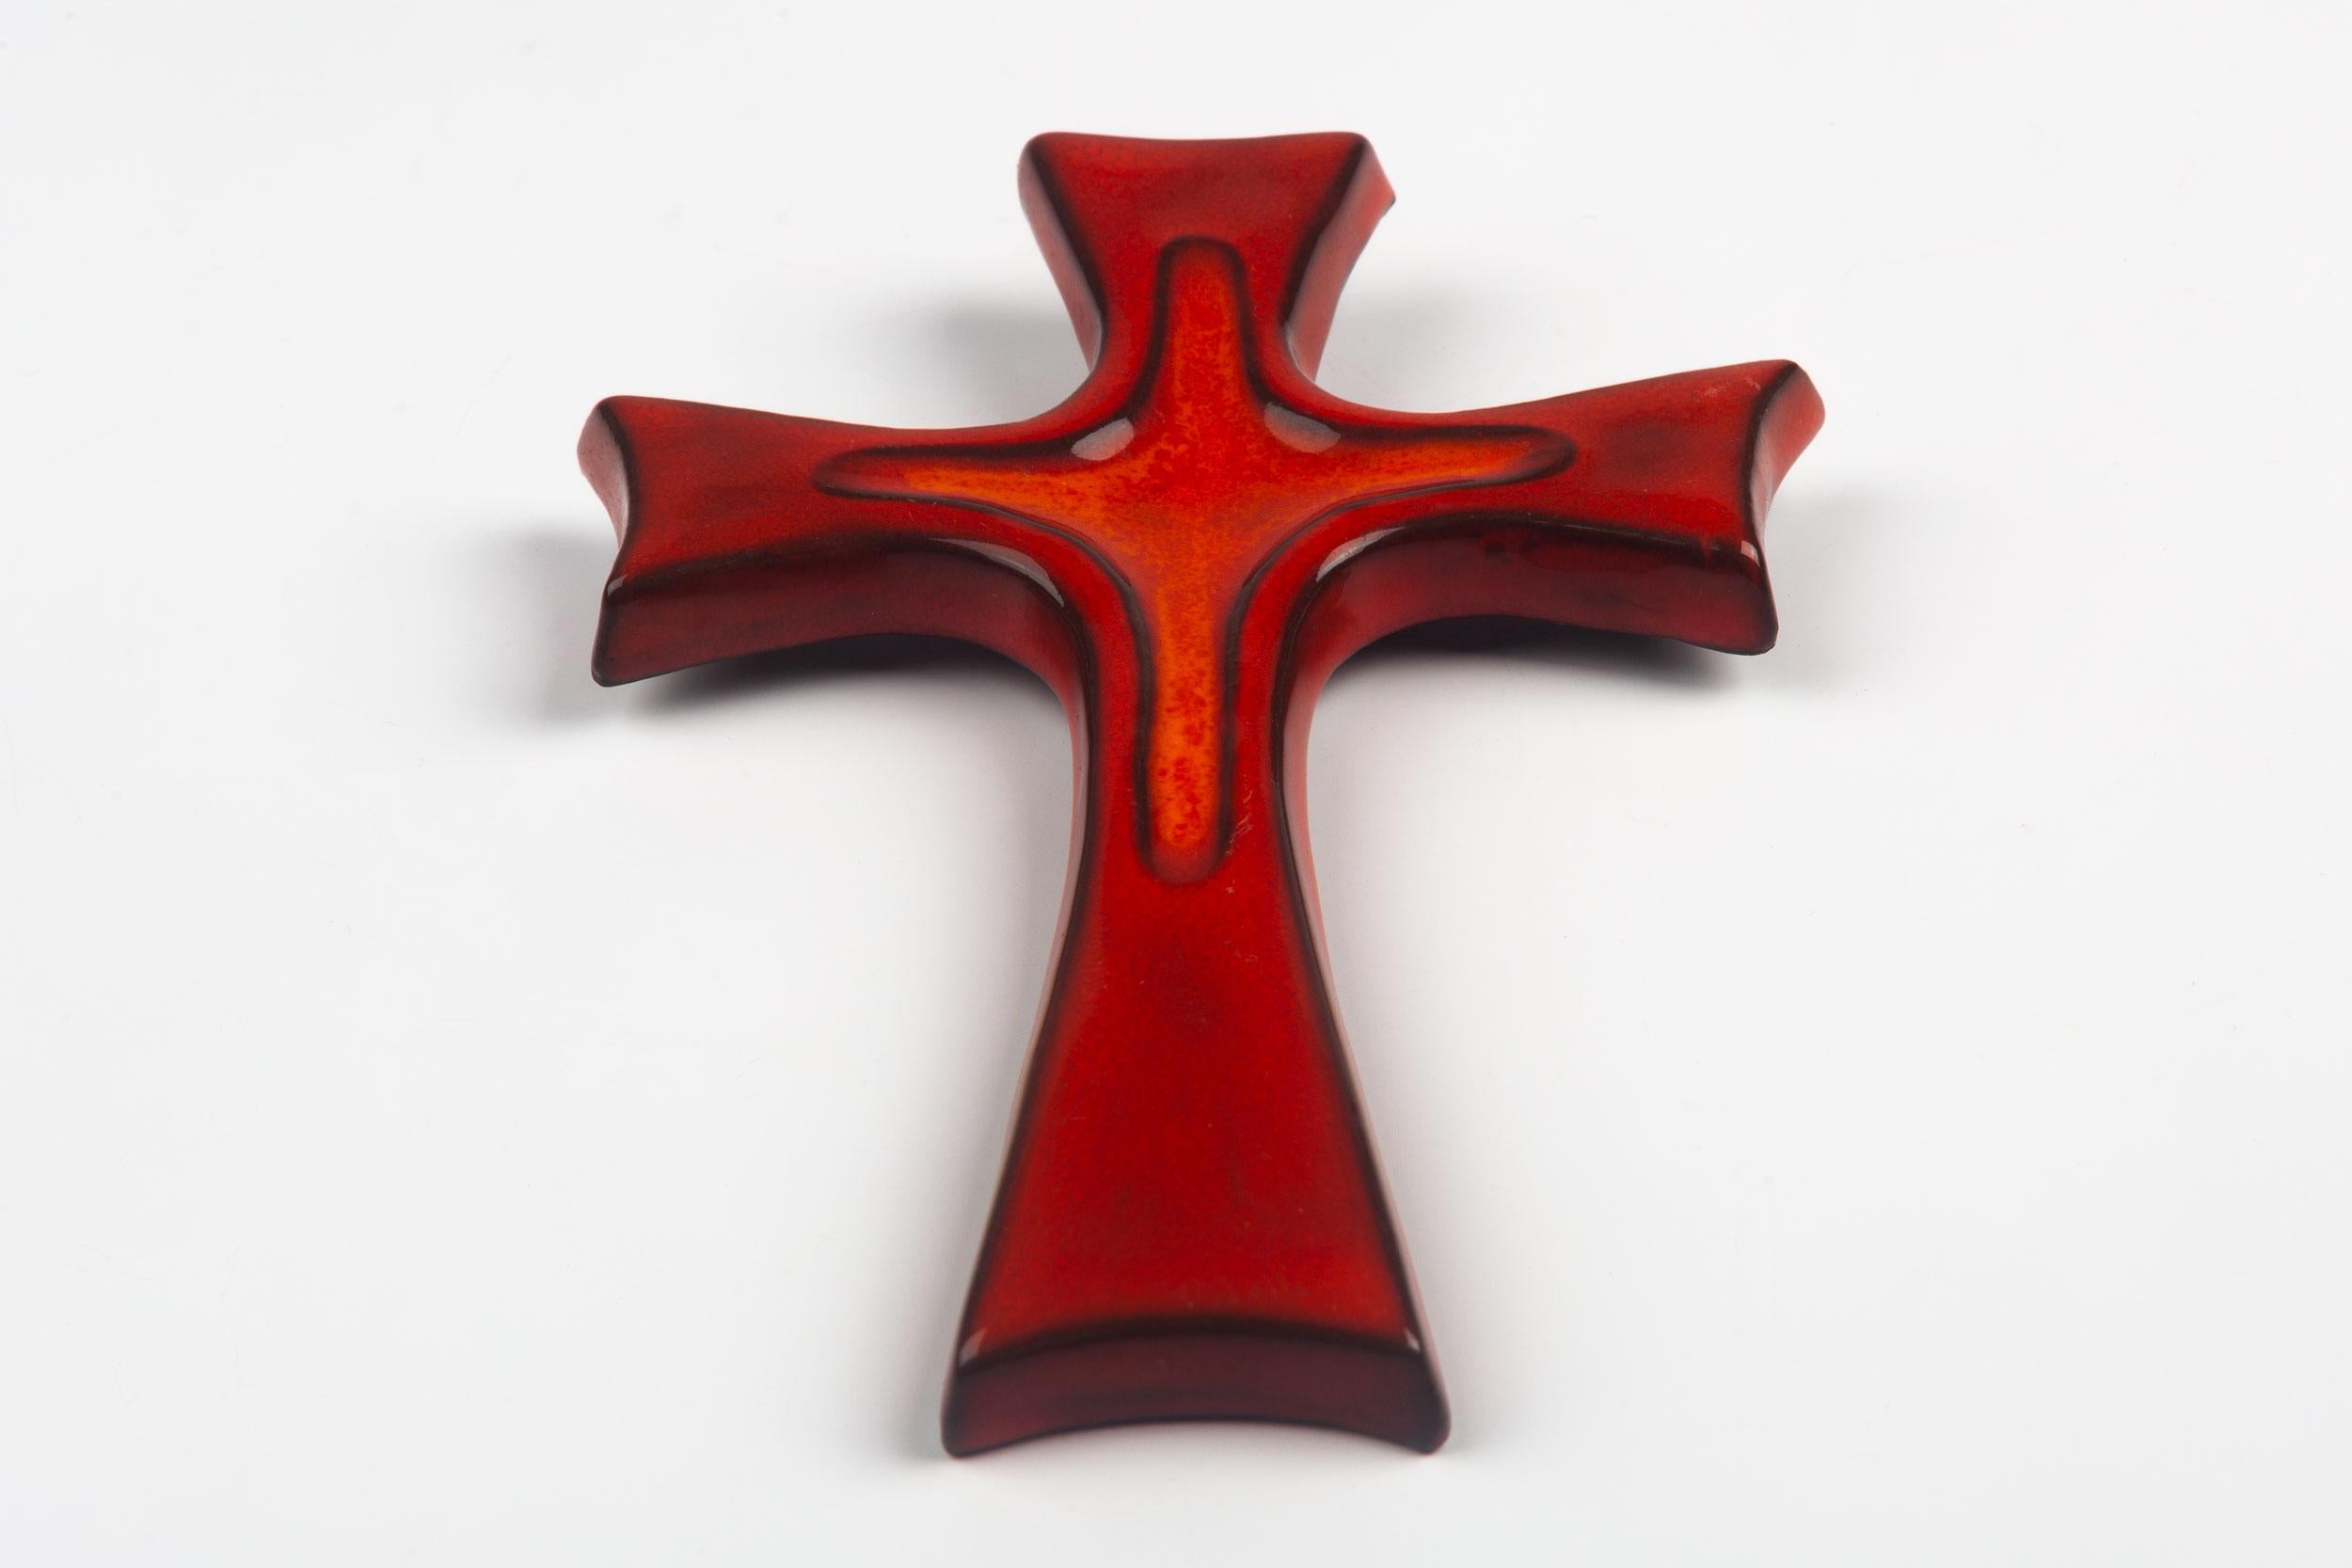 Midcentury European ceramic wall cross in red with dark brown, almost black decorative outlining and high-gloss glaze. From a large collection of crosses handmade by Flemish artisans. 

From modernism to brutalism, the crosses in our collection